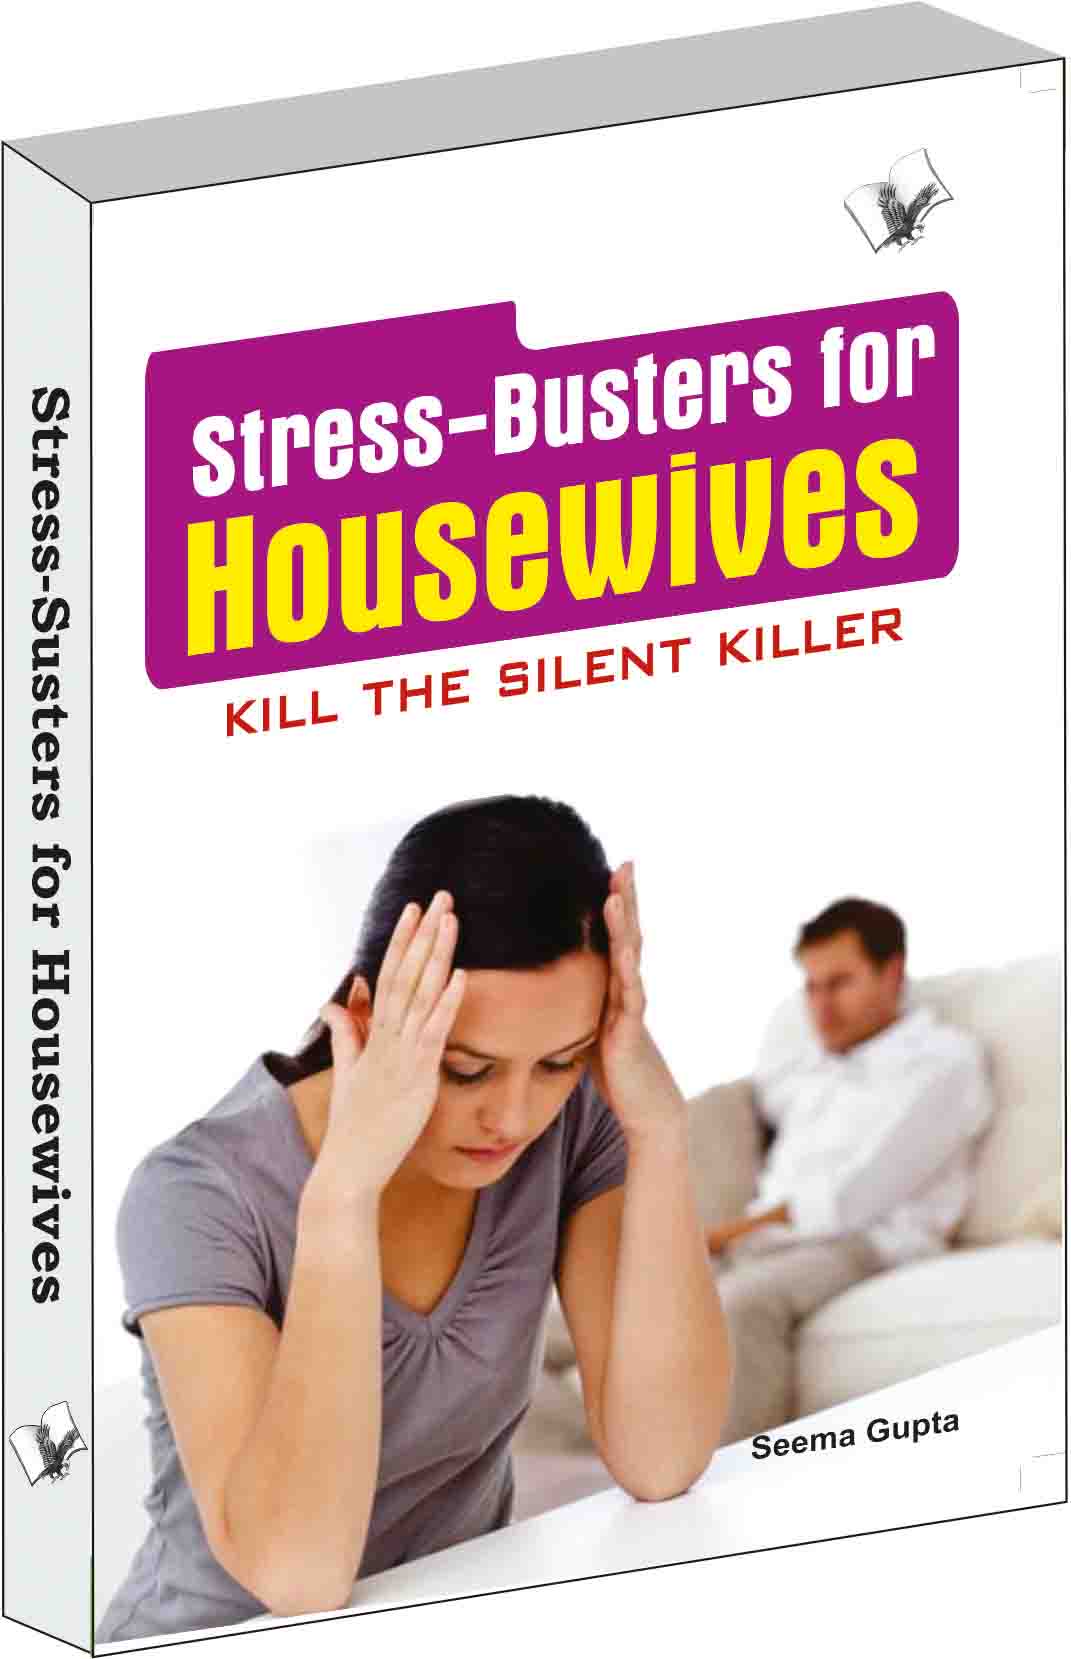 Stress Busters for Housewives -How to overcome stresses that housewives suffer 